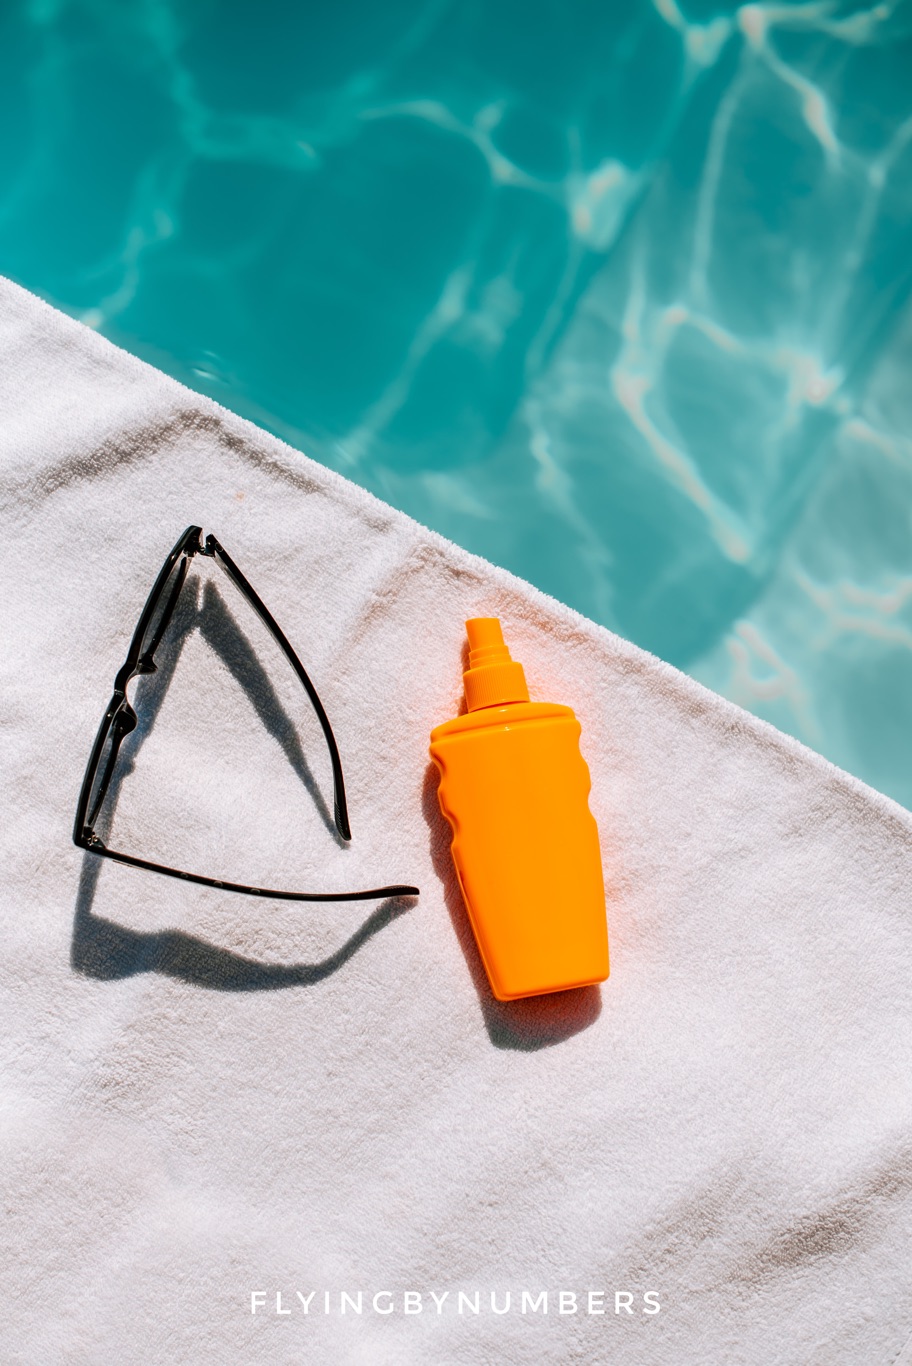 Suncream and glasses by a pool